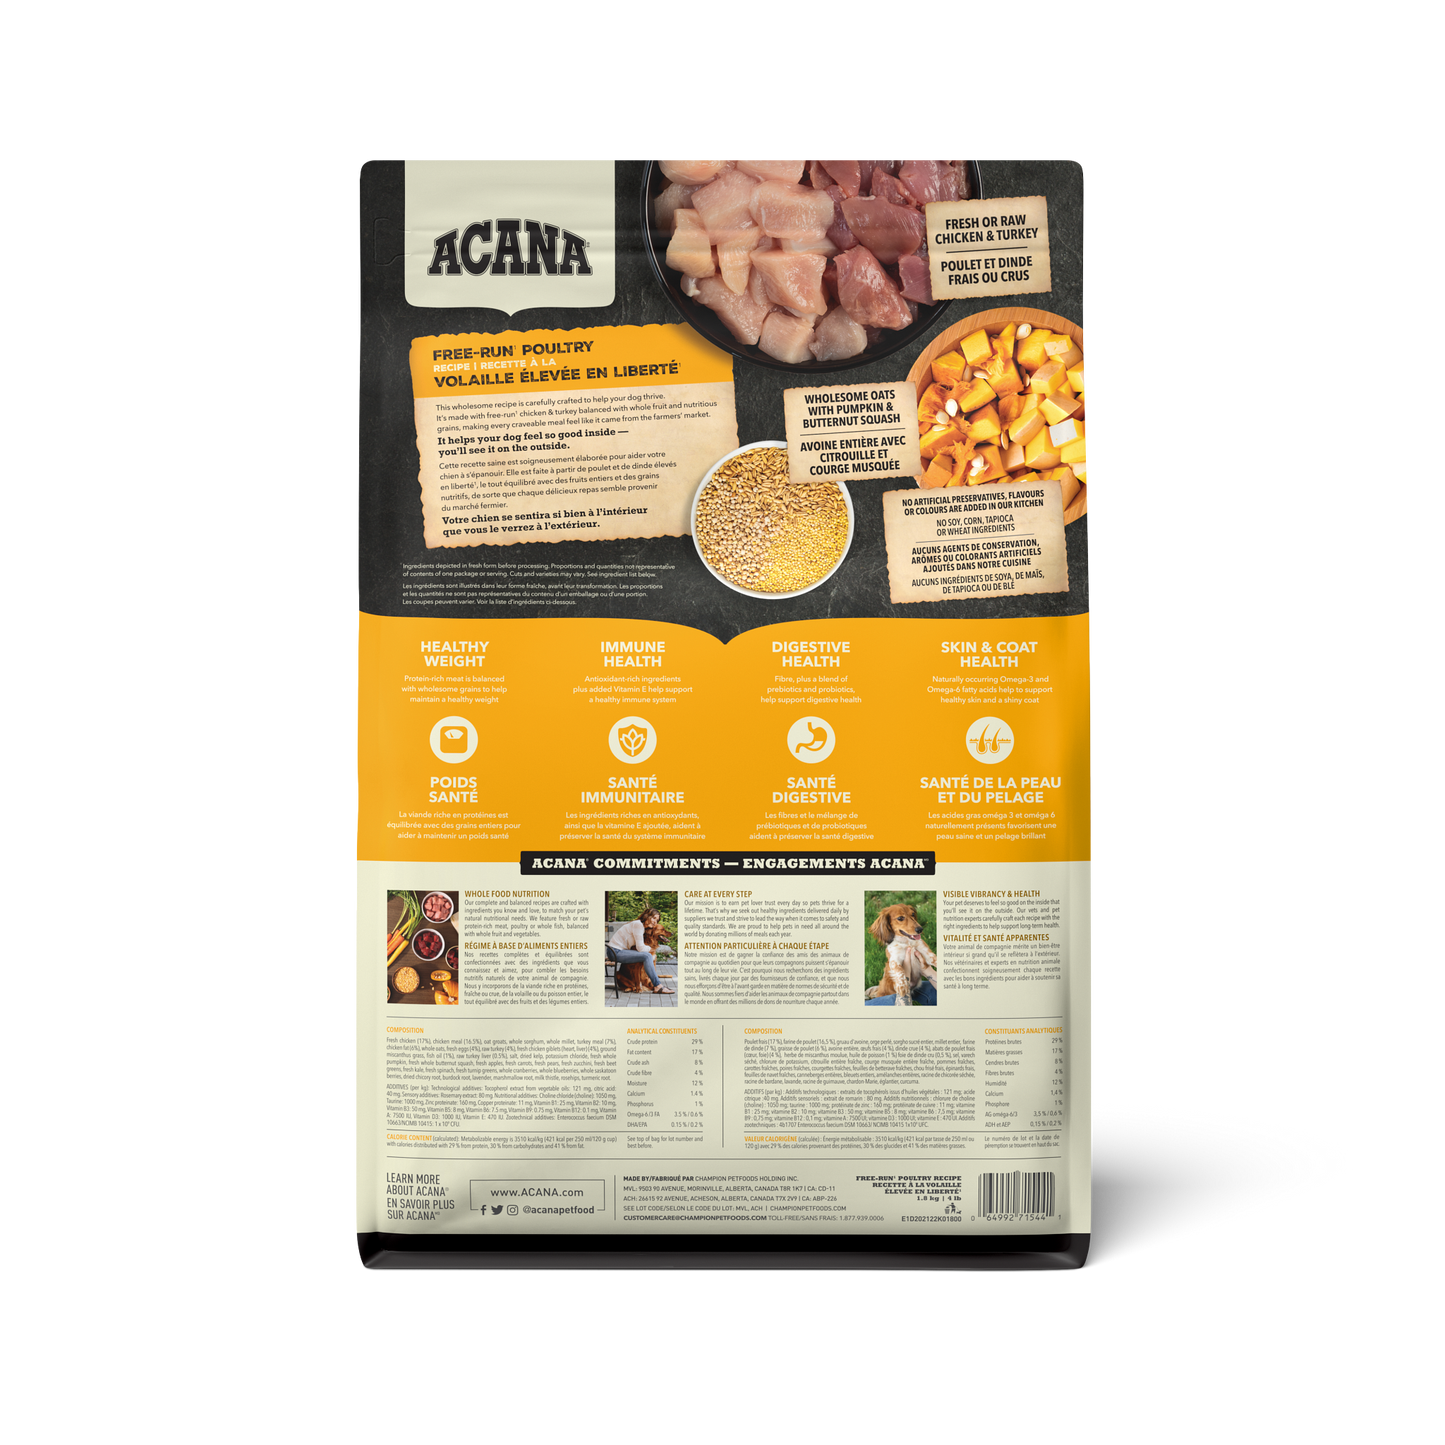 Acana Healthy Grains Free-Run Poultry Dry Dog Food Recipe  Dog Food  | PetMax Canada